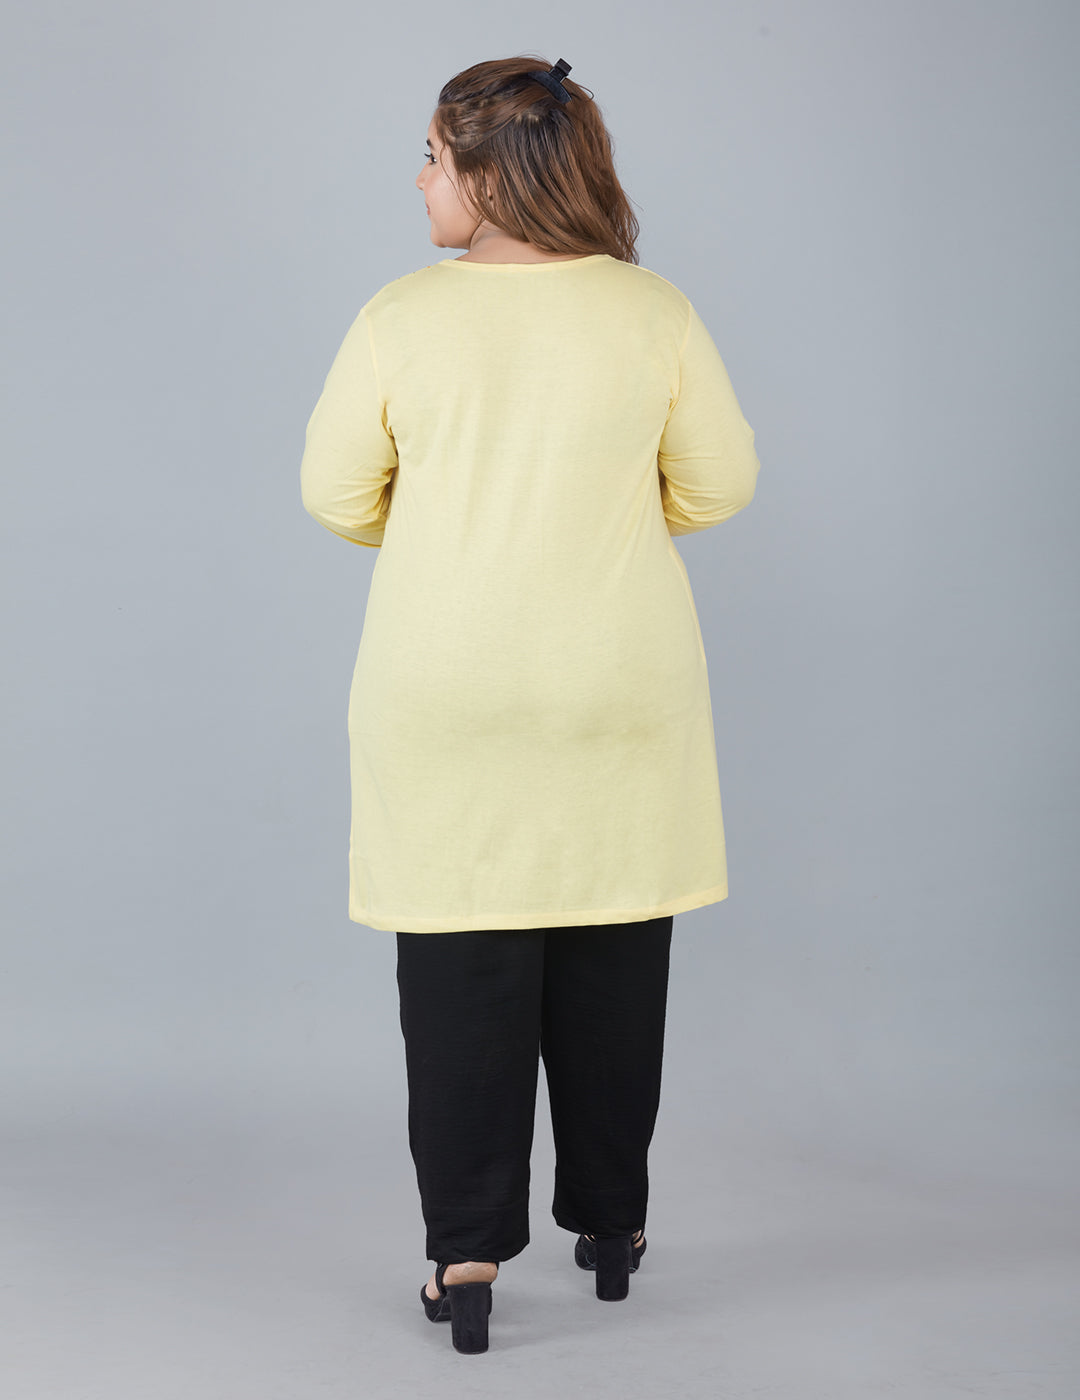 Cotton Long Top for Women Plus Size - Full Sleeve - Yellow